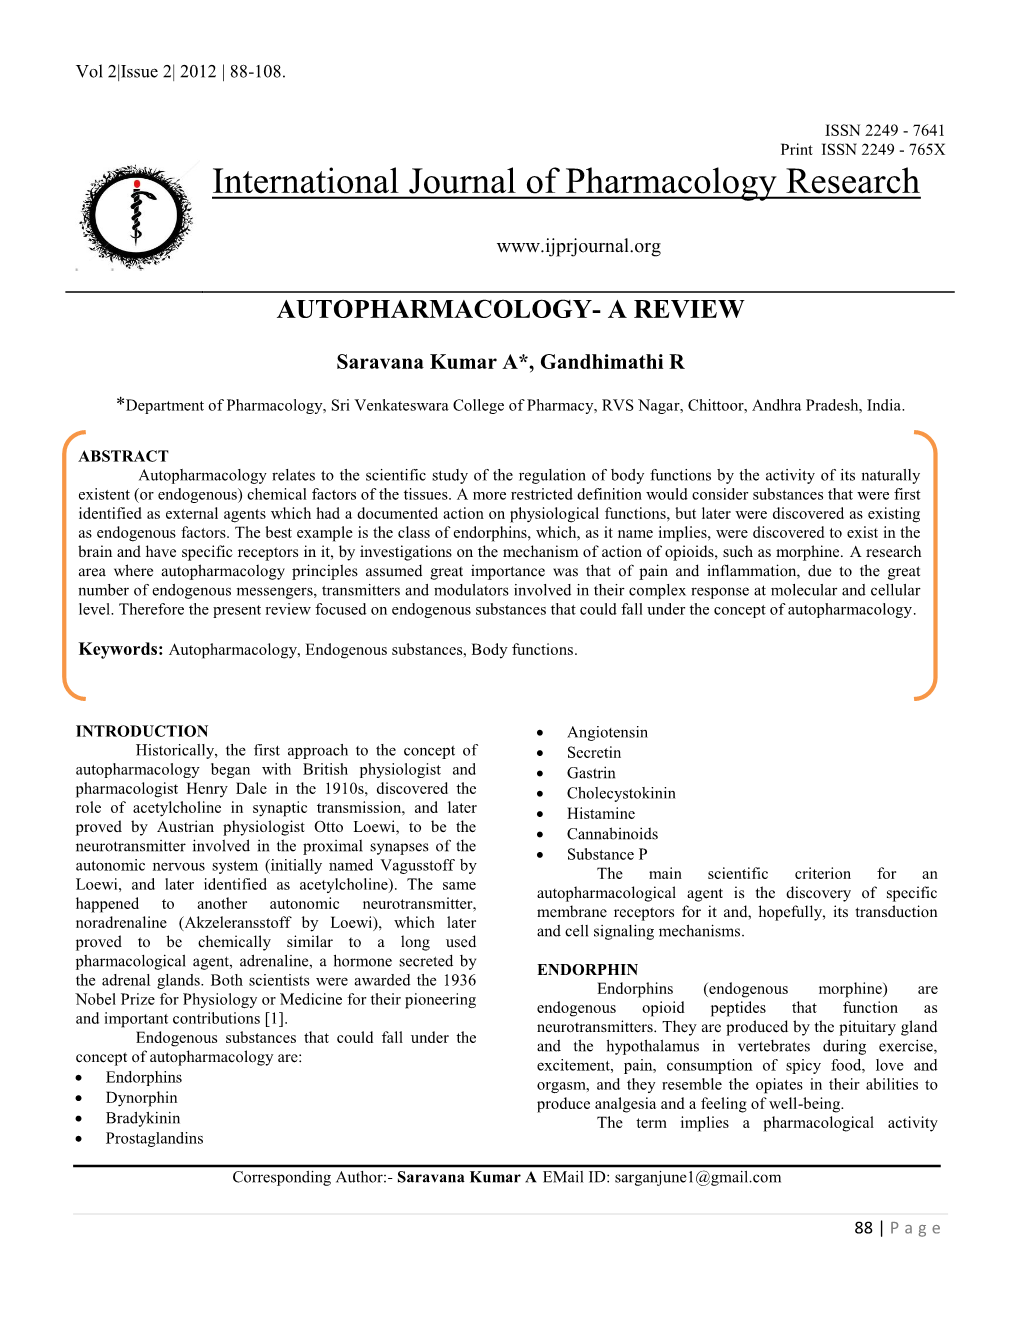 International Journal of Pharmacology Research